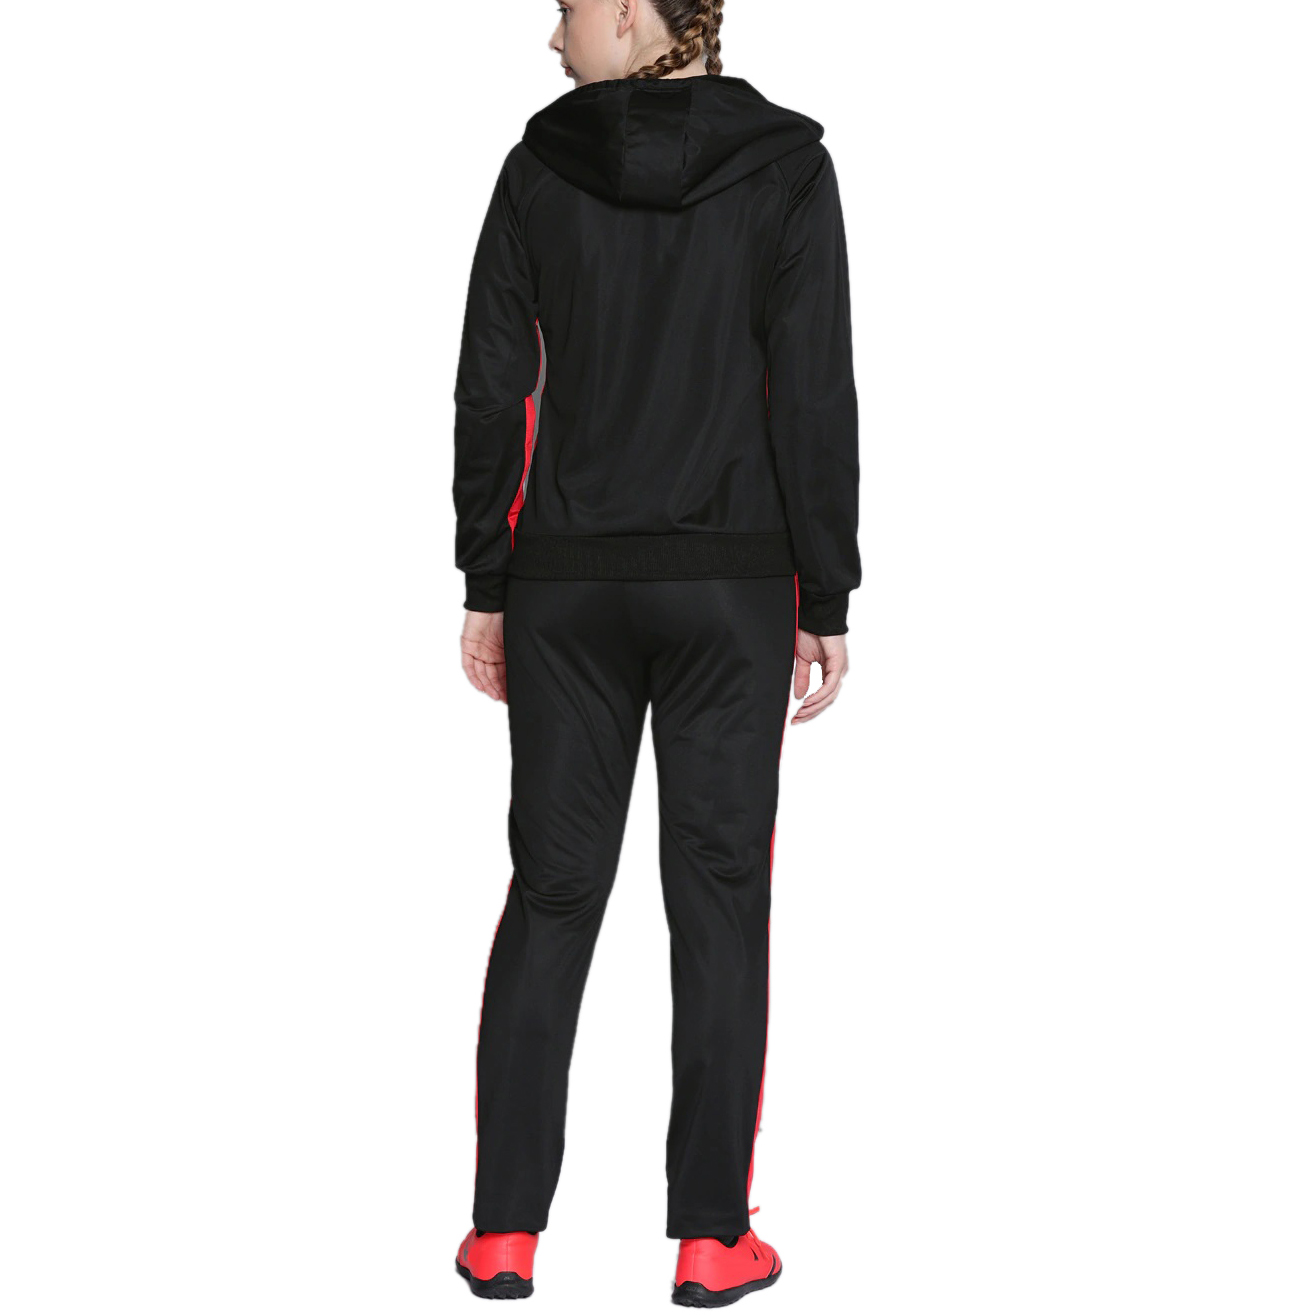 Solid Black Red Side Paneling Tracksuits